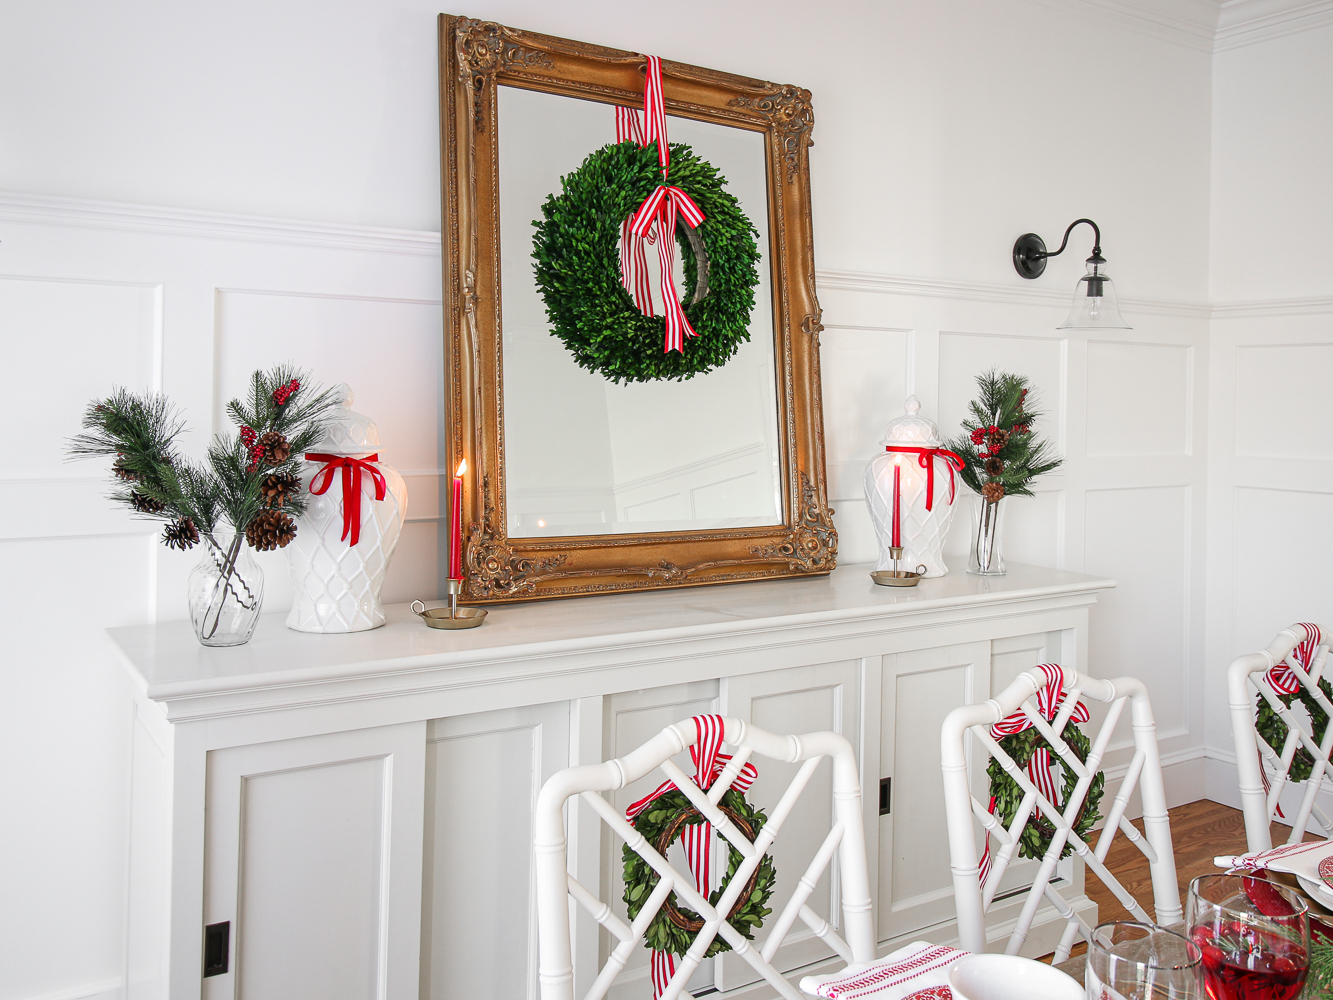 hang wreaths on mirrors, vintage gold mirror styled with boxwood wreath with decorative red and white striped bow, white dining room with wall molding, white sideboard, white chippendale chairs